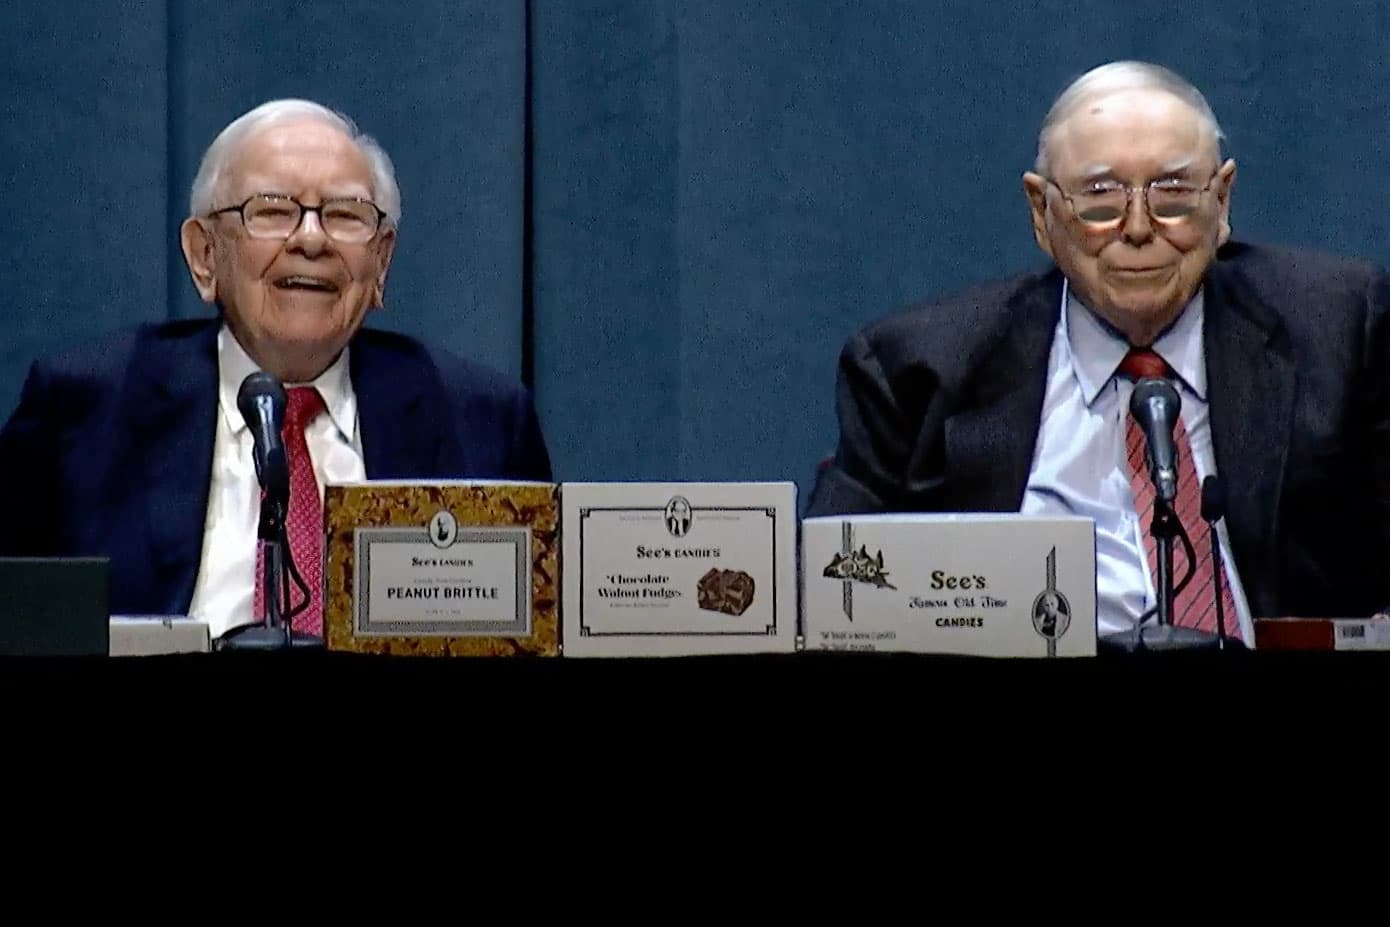 Berkshire Hathaway's annual meeting is here: What to expect from Warren Buffett and Charlie Munger